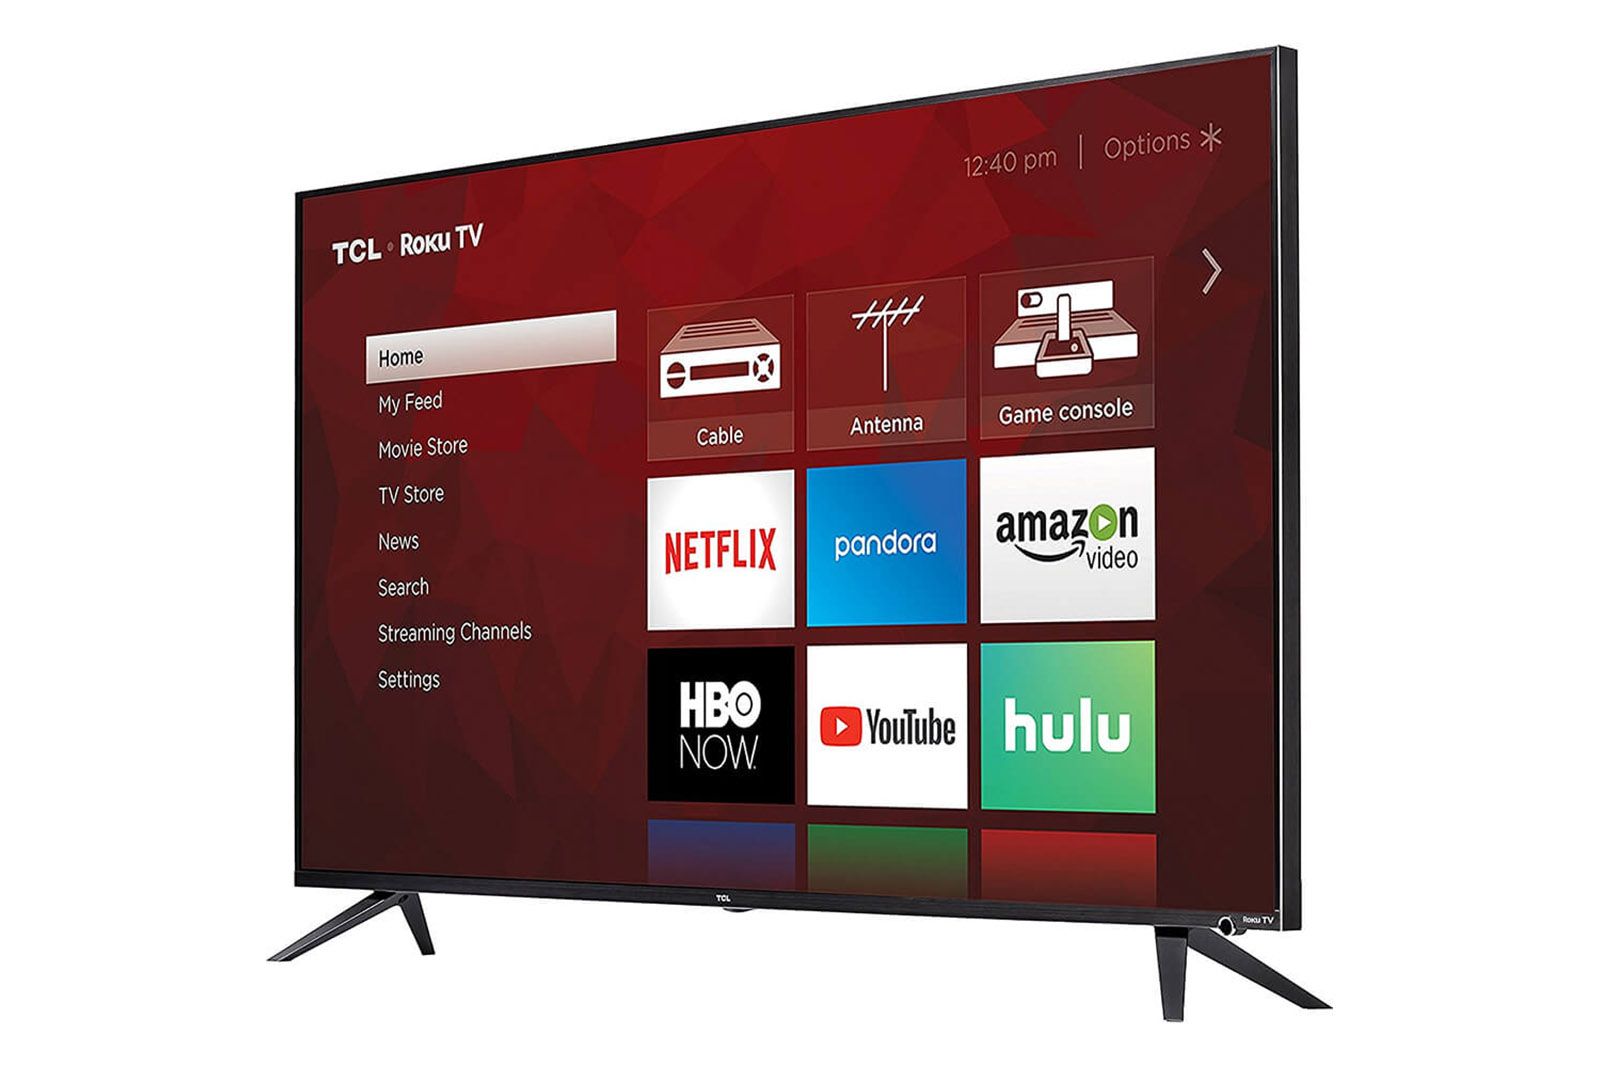 Tcl And Roku Working On 8k Tvs For Late 2019 Release image 1